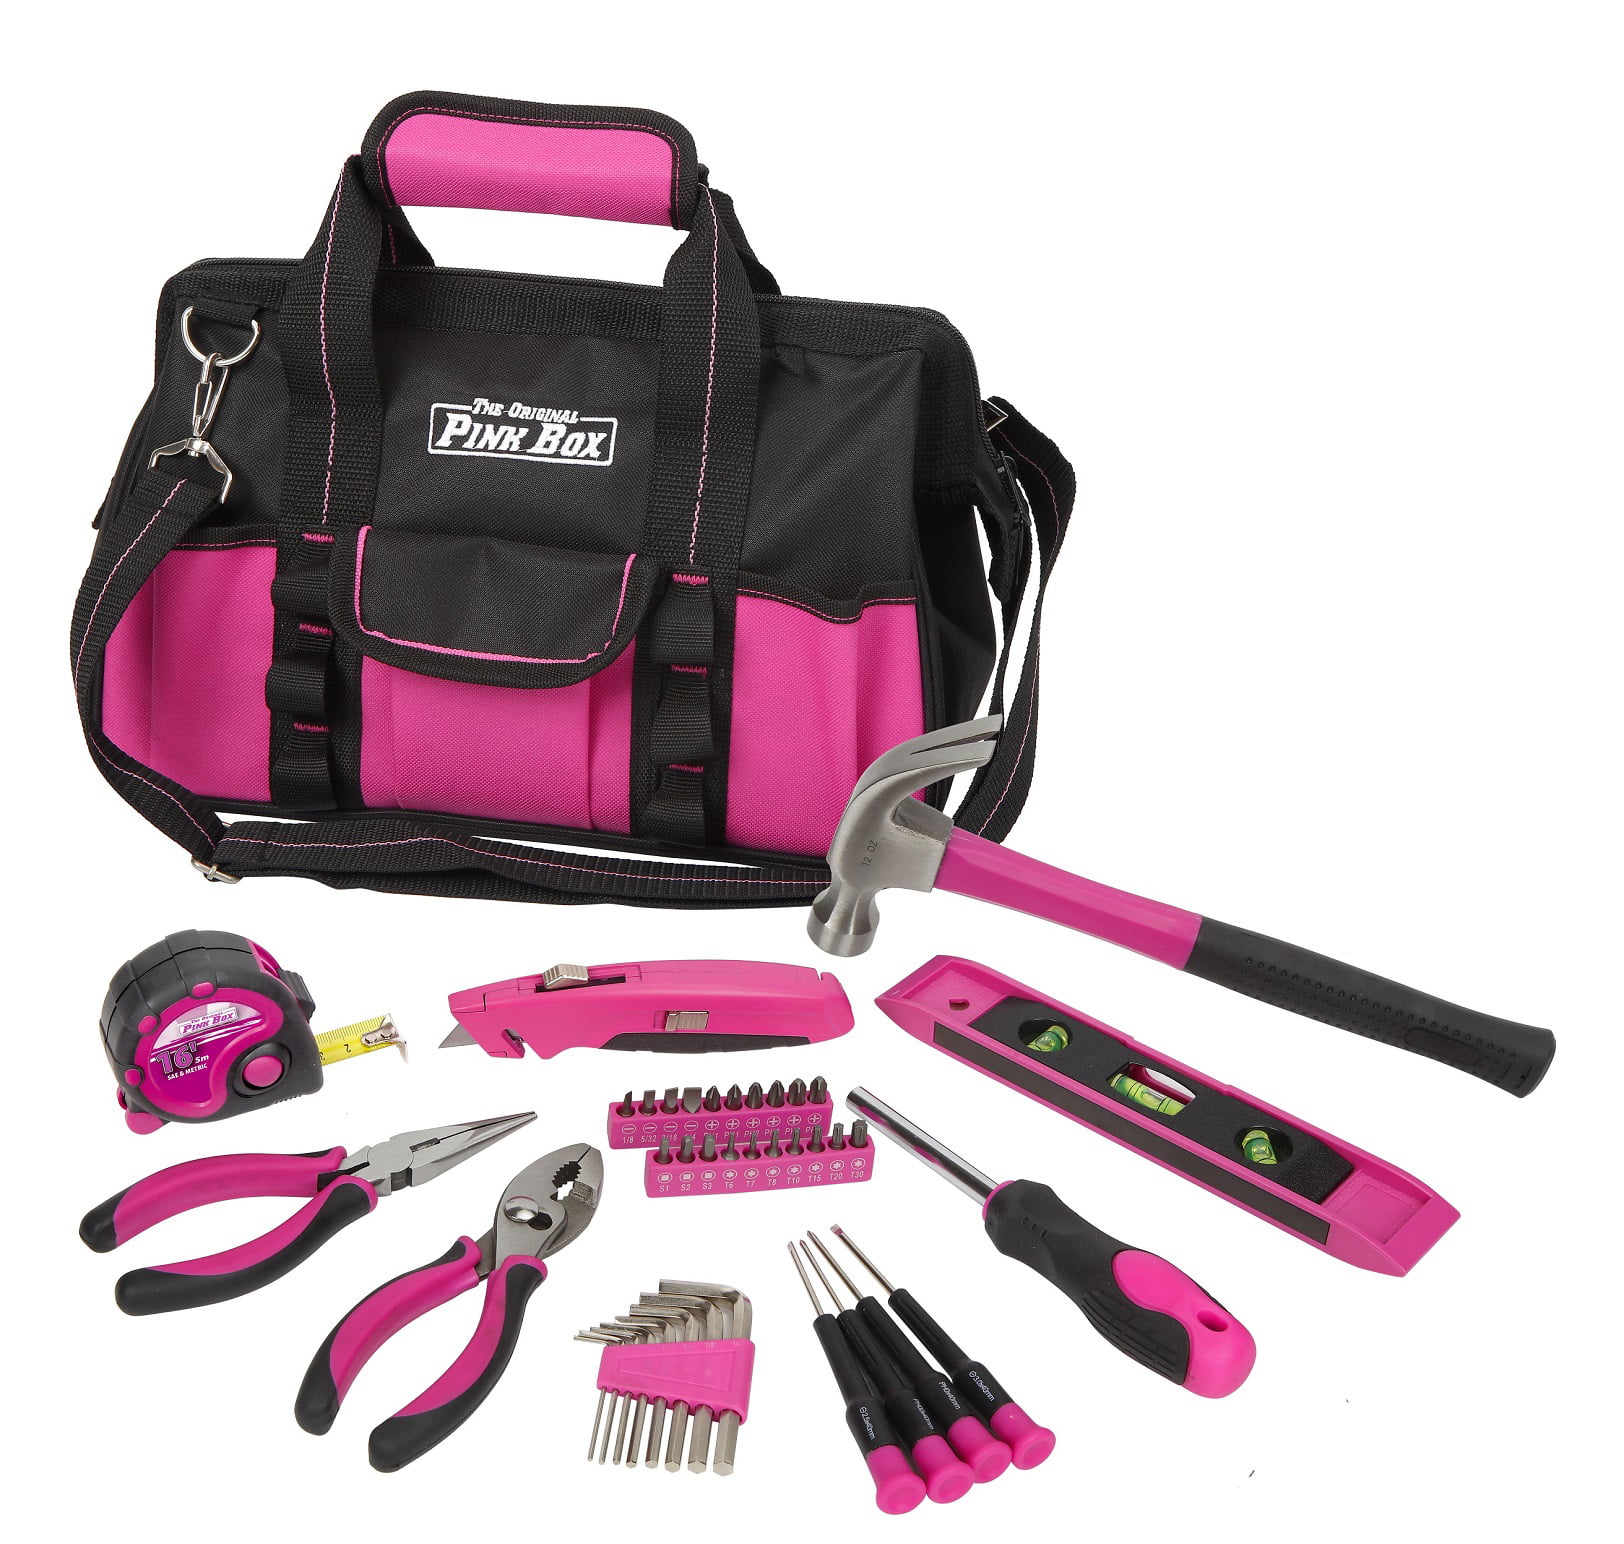 Pink Household 86-Pcs Hand Tool Set W/ Roll-Up Bag Basic Home Emergency Repairs 